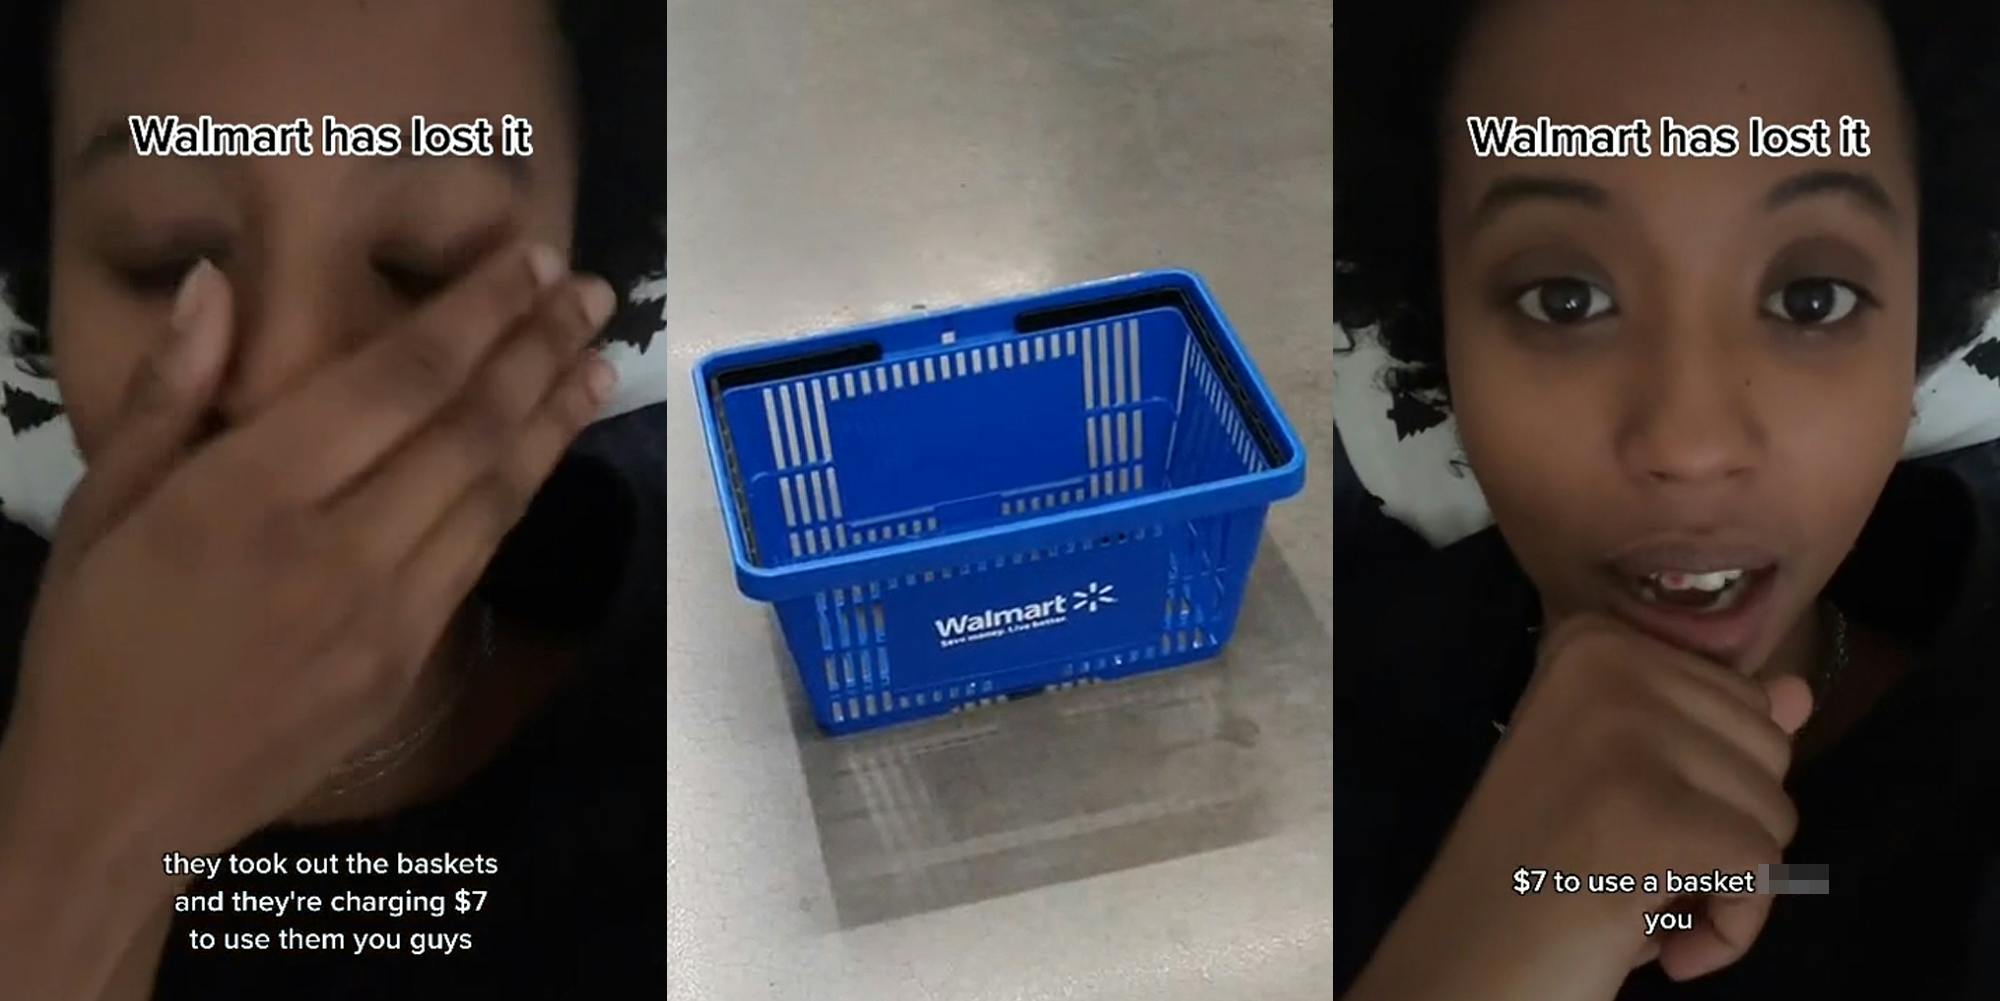 woman with hand on face with caption "Walmart has lost it they took out the baskets and they're charging $7 to use them you guys" (l) Walmart shopping basket on floor (c) woman speaking with caption "Walmart has lost it $7 to use a basket blank you" (r)